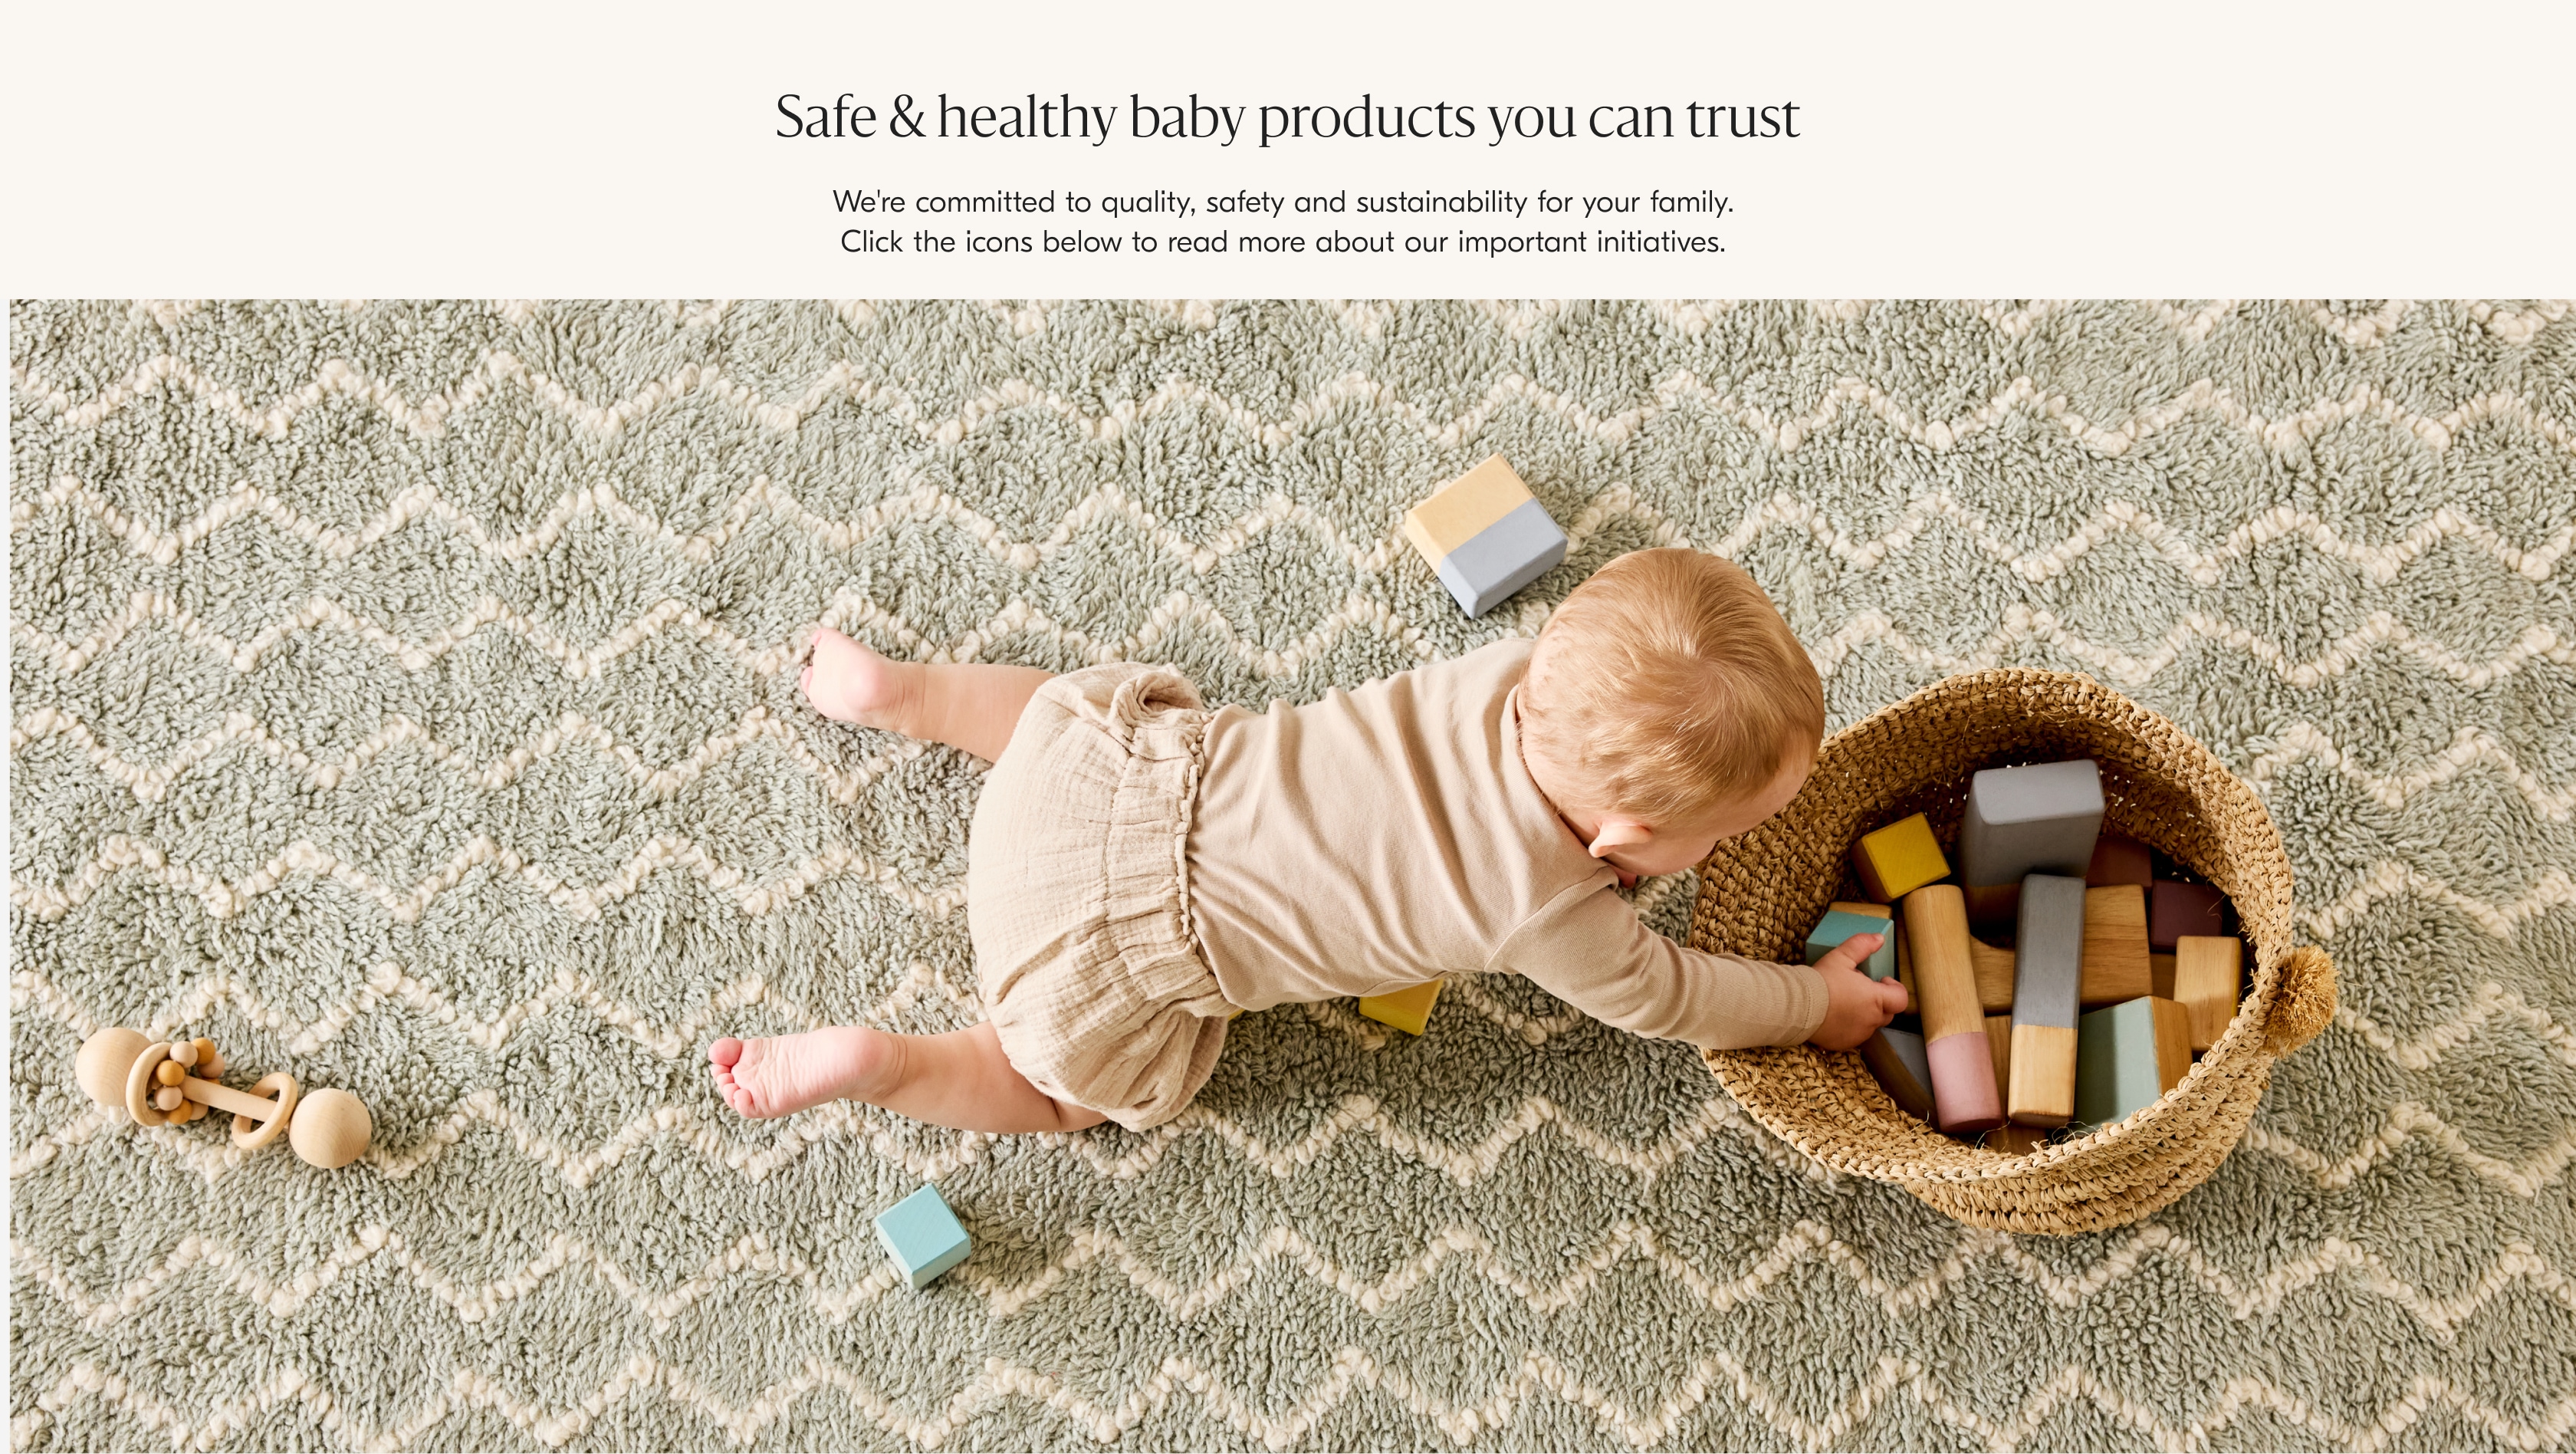 Safe & healthy baby products you can trust.